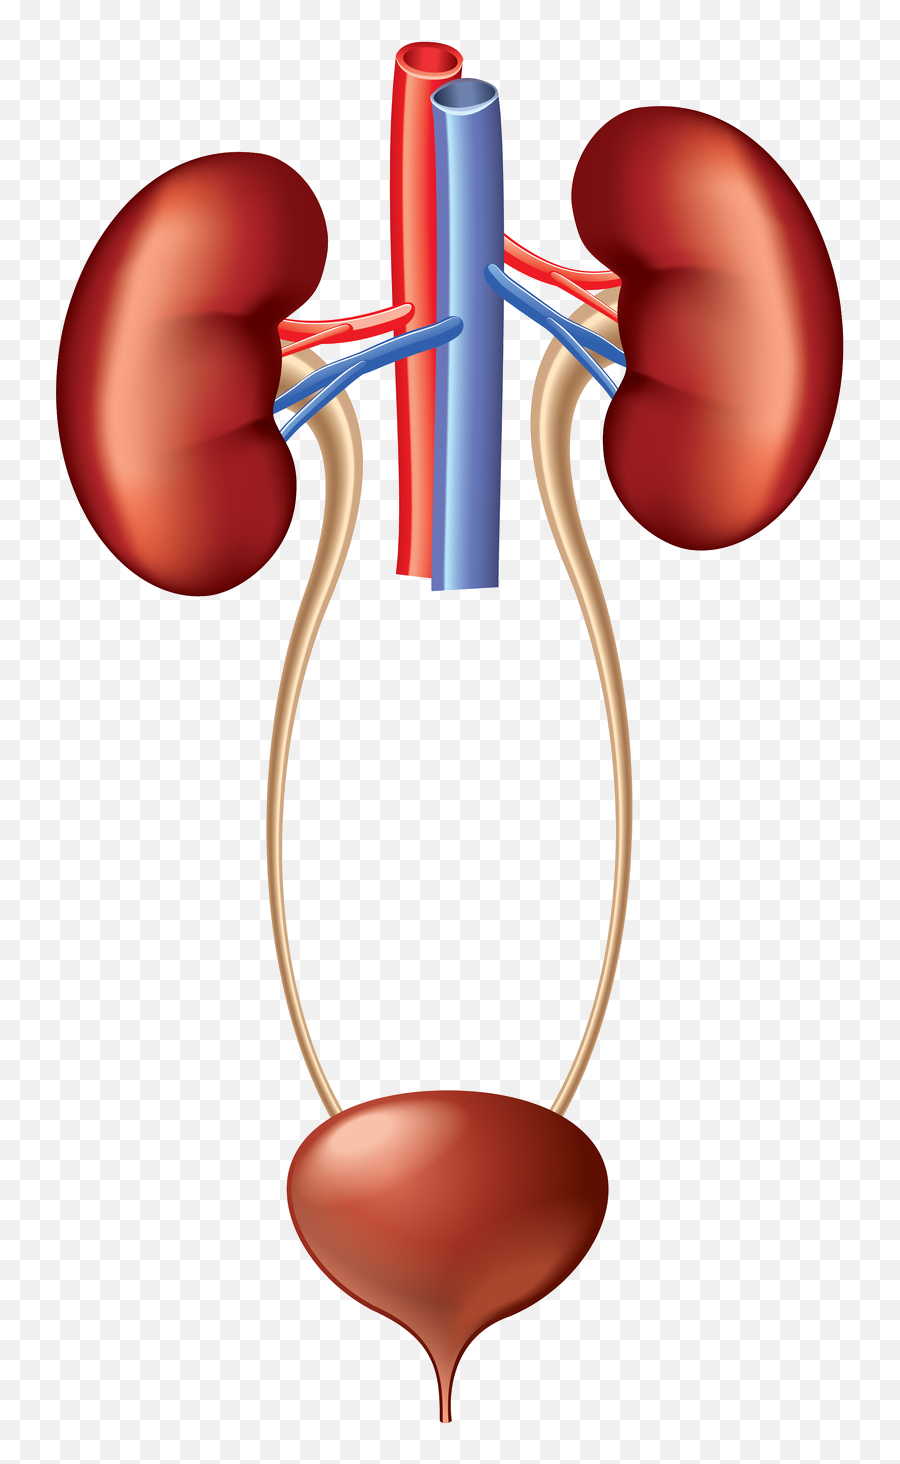 Download Hd Kidney Clipart Urinary - Excretory System Emoji,Kidney Clipart